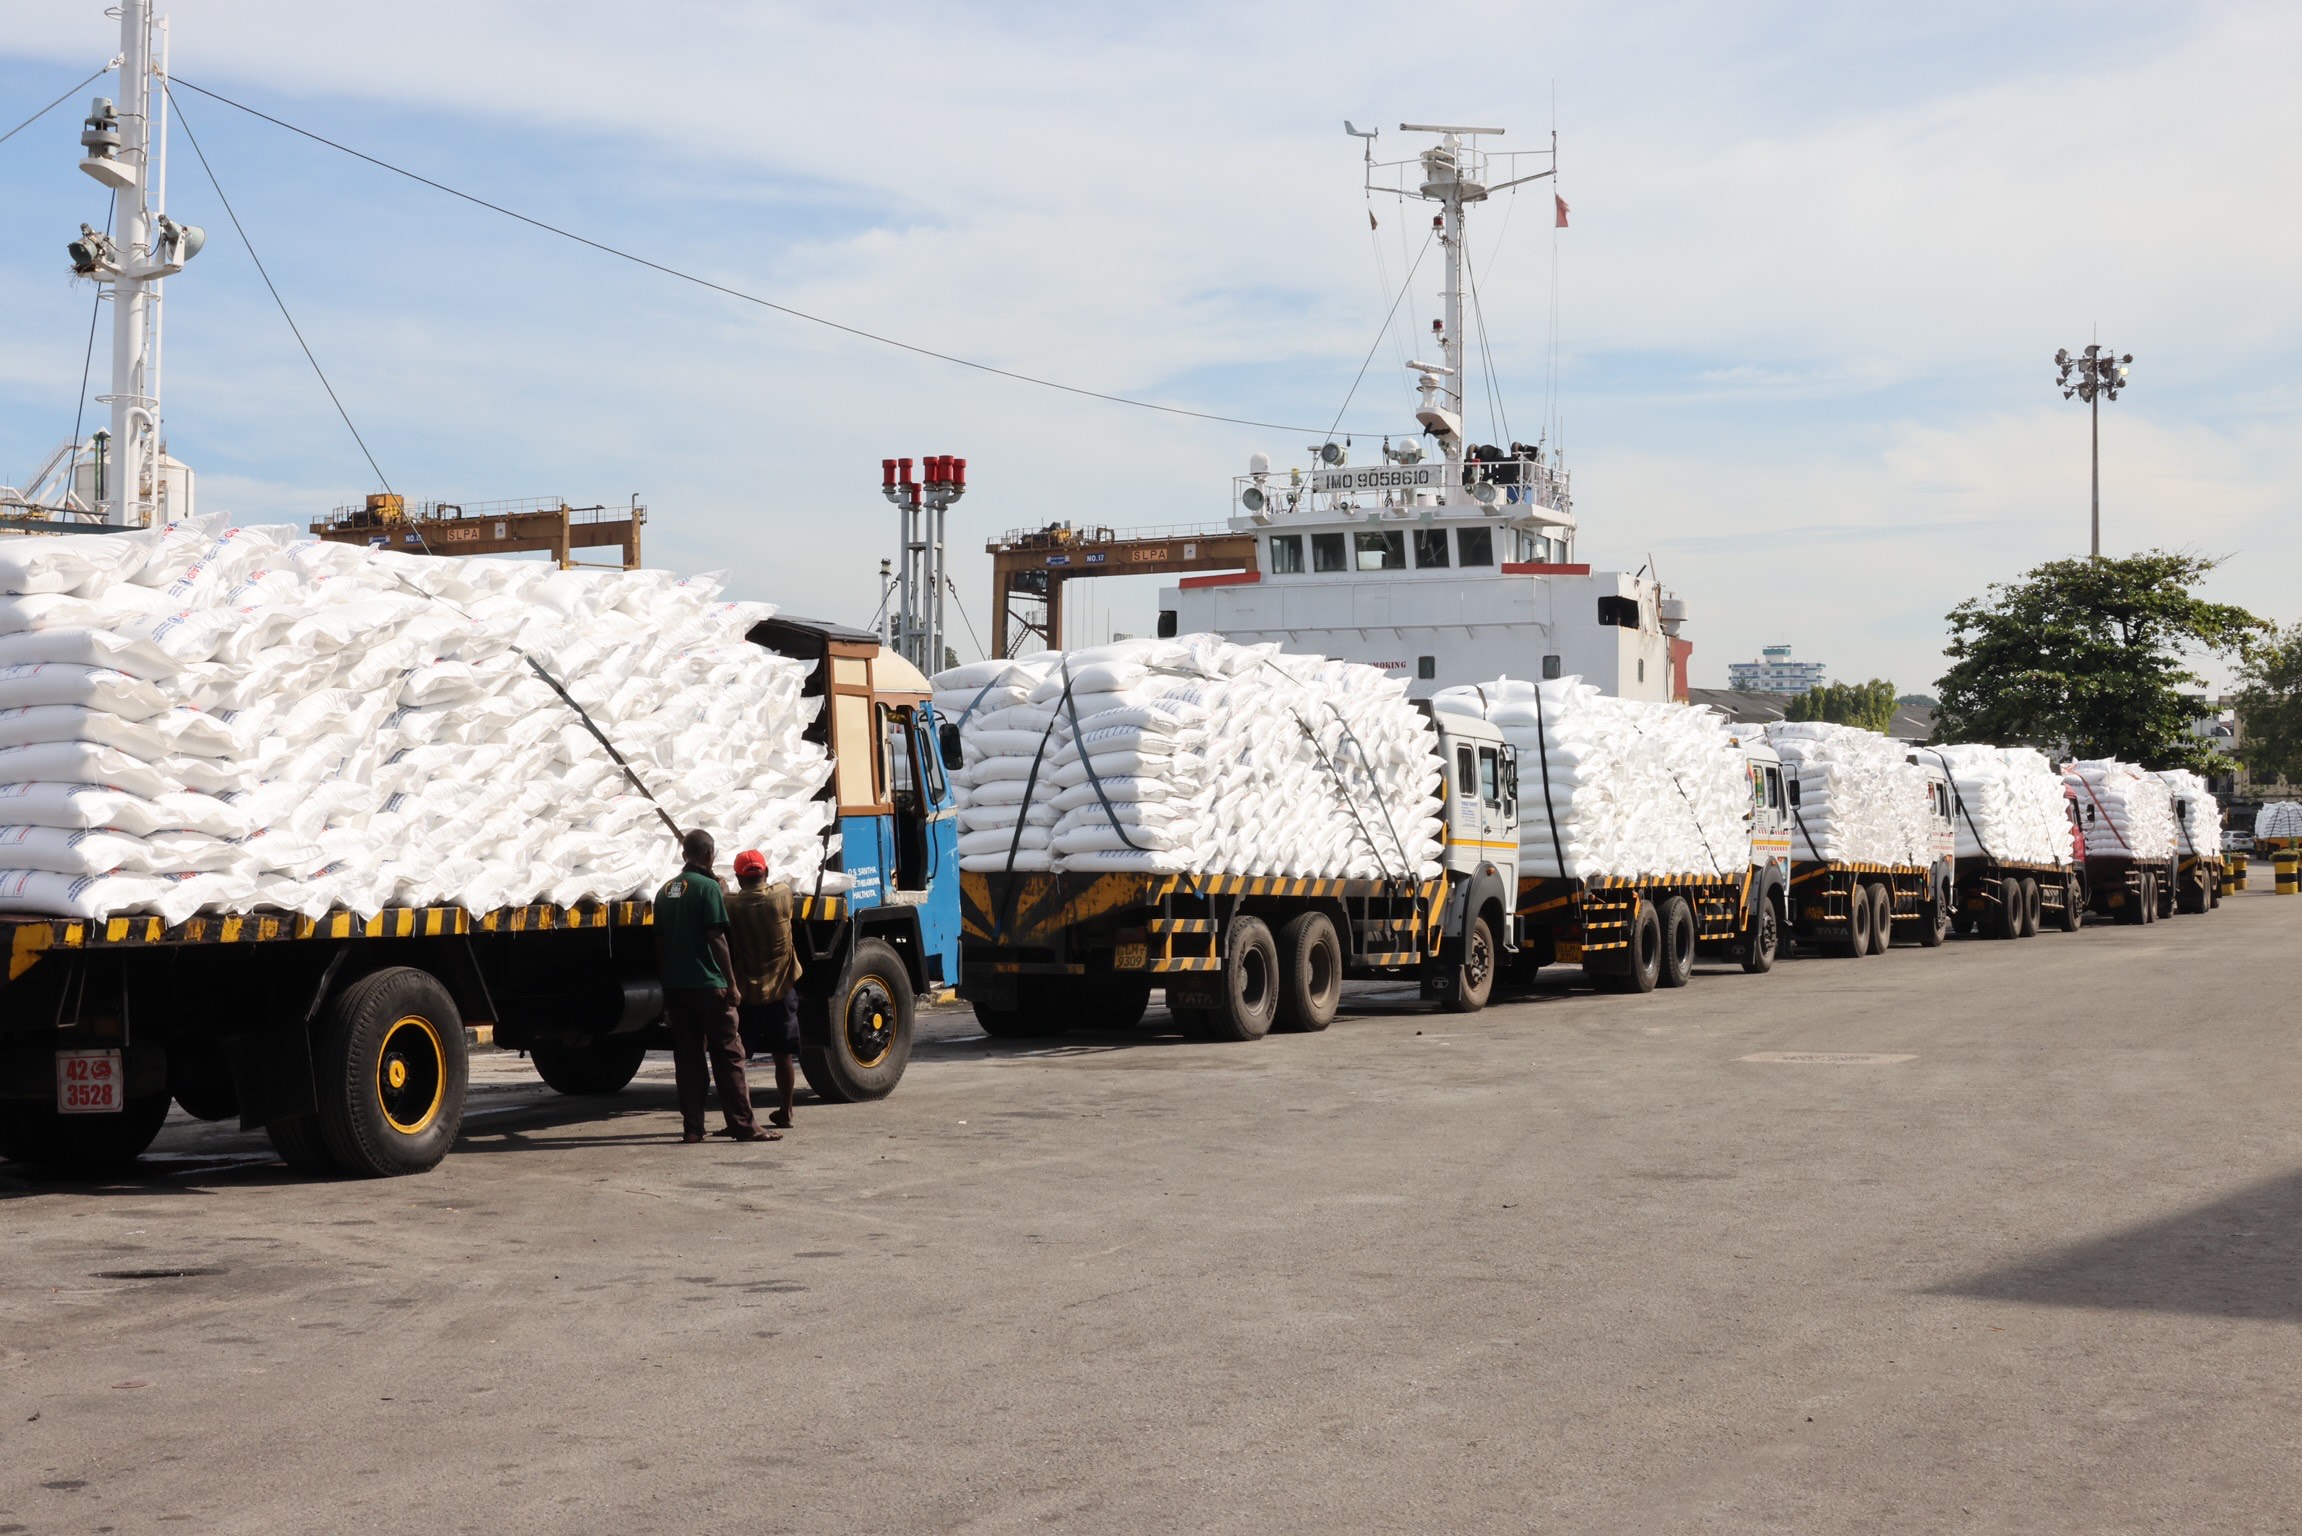 <strong>United States Provides 9,300 Metric Tons of Fertilizer to Paddy Farmers in Sri Lanka</strong>